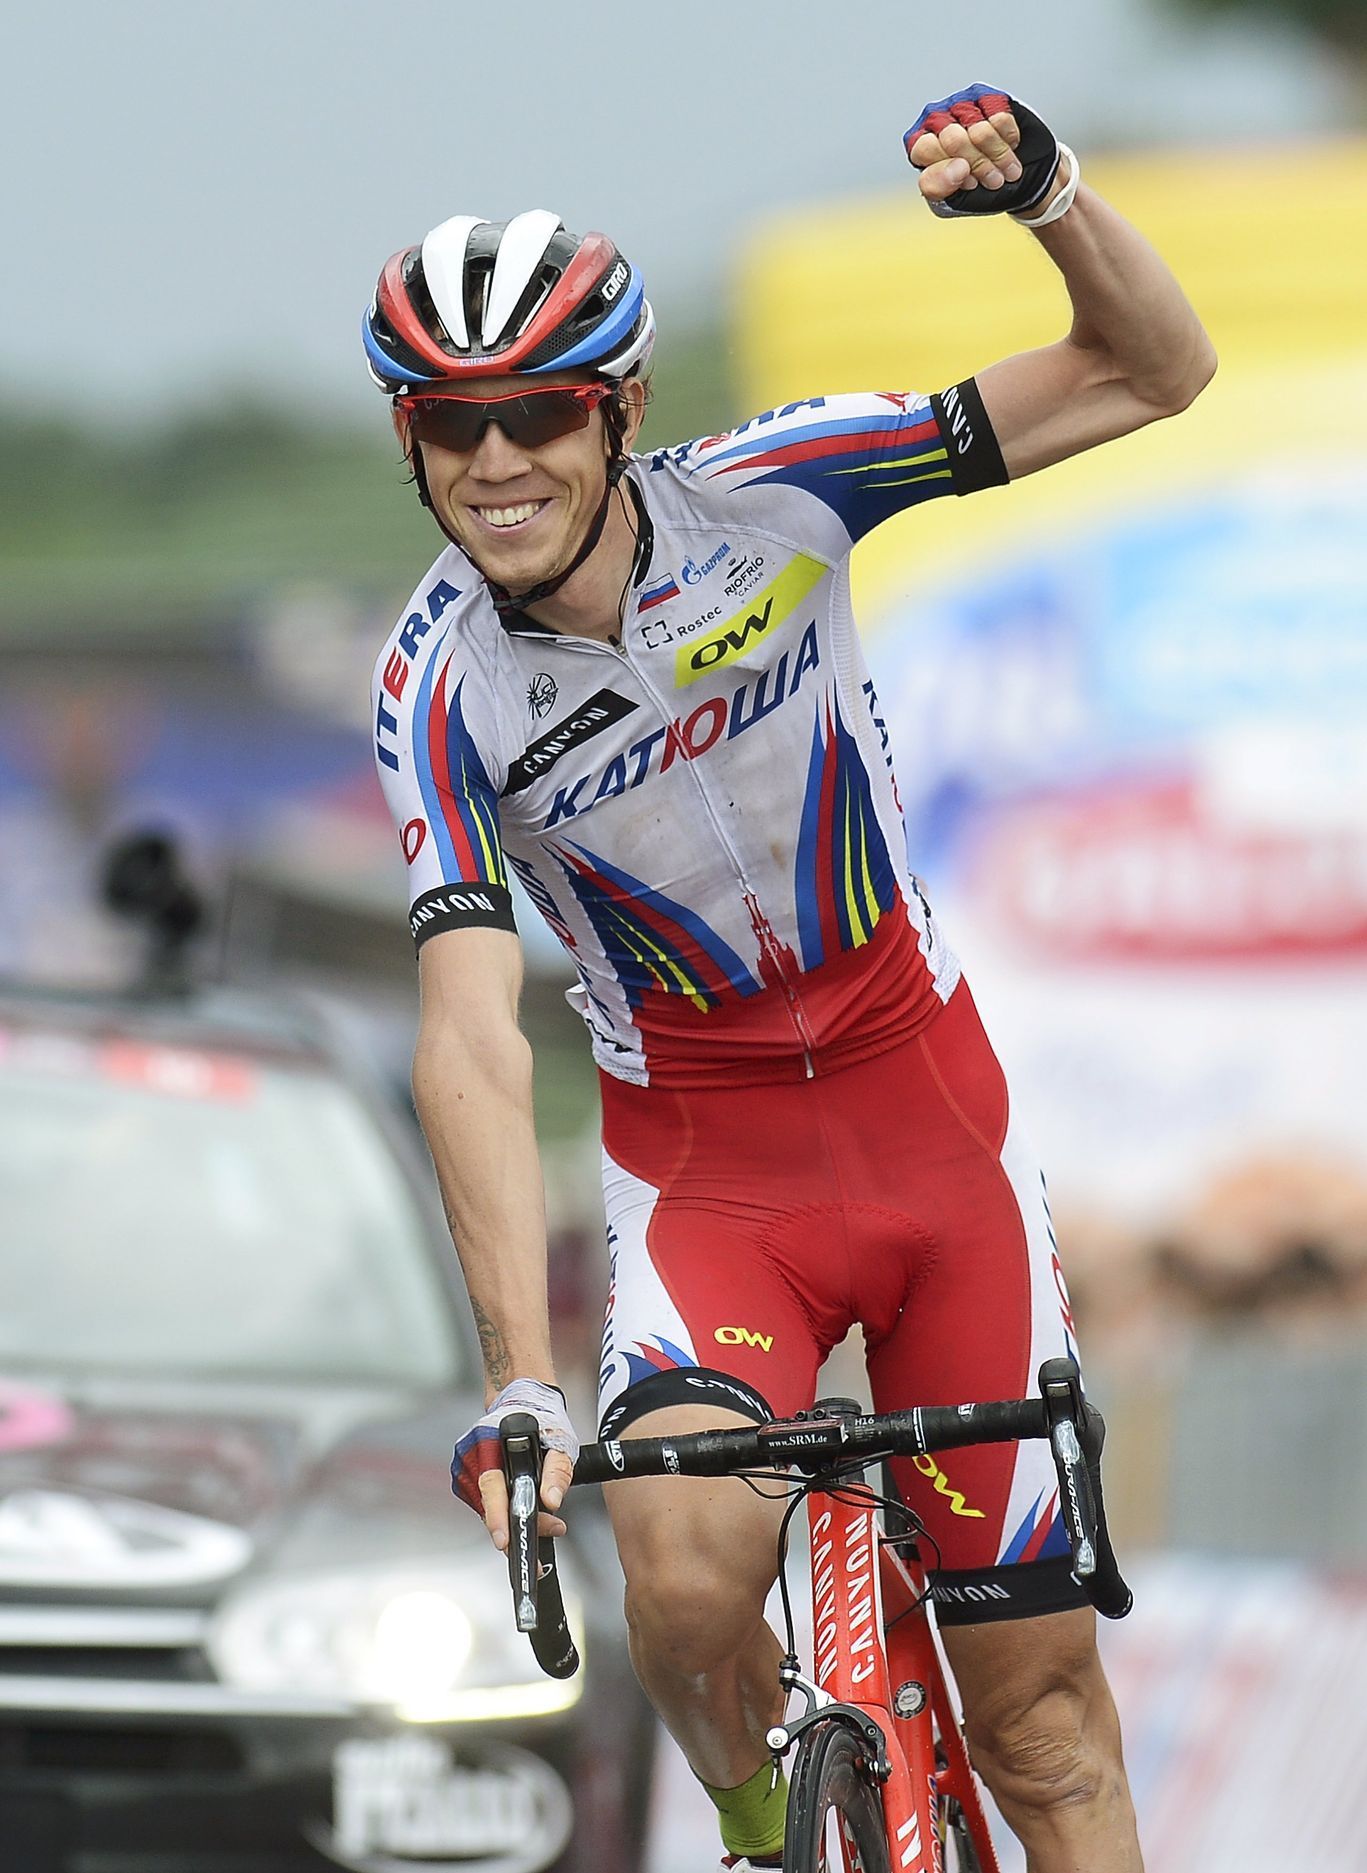 Team Katusha rider Zakarin of Russia celebrates after winning the 153 km eleven stage of the 98th Giro d'Italia cycling race from Forli to Imola